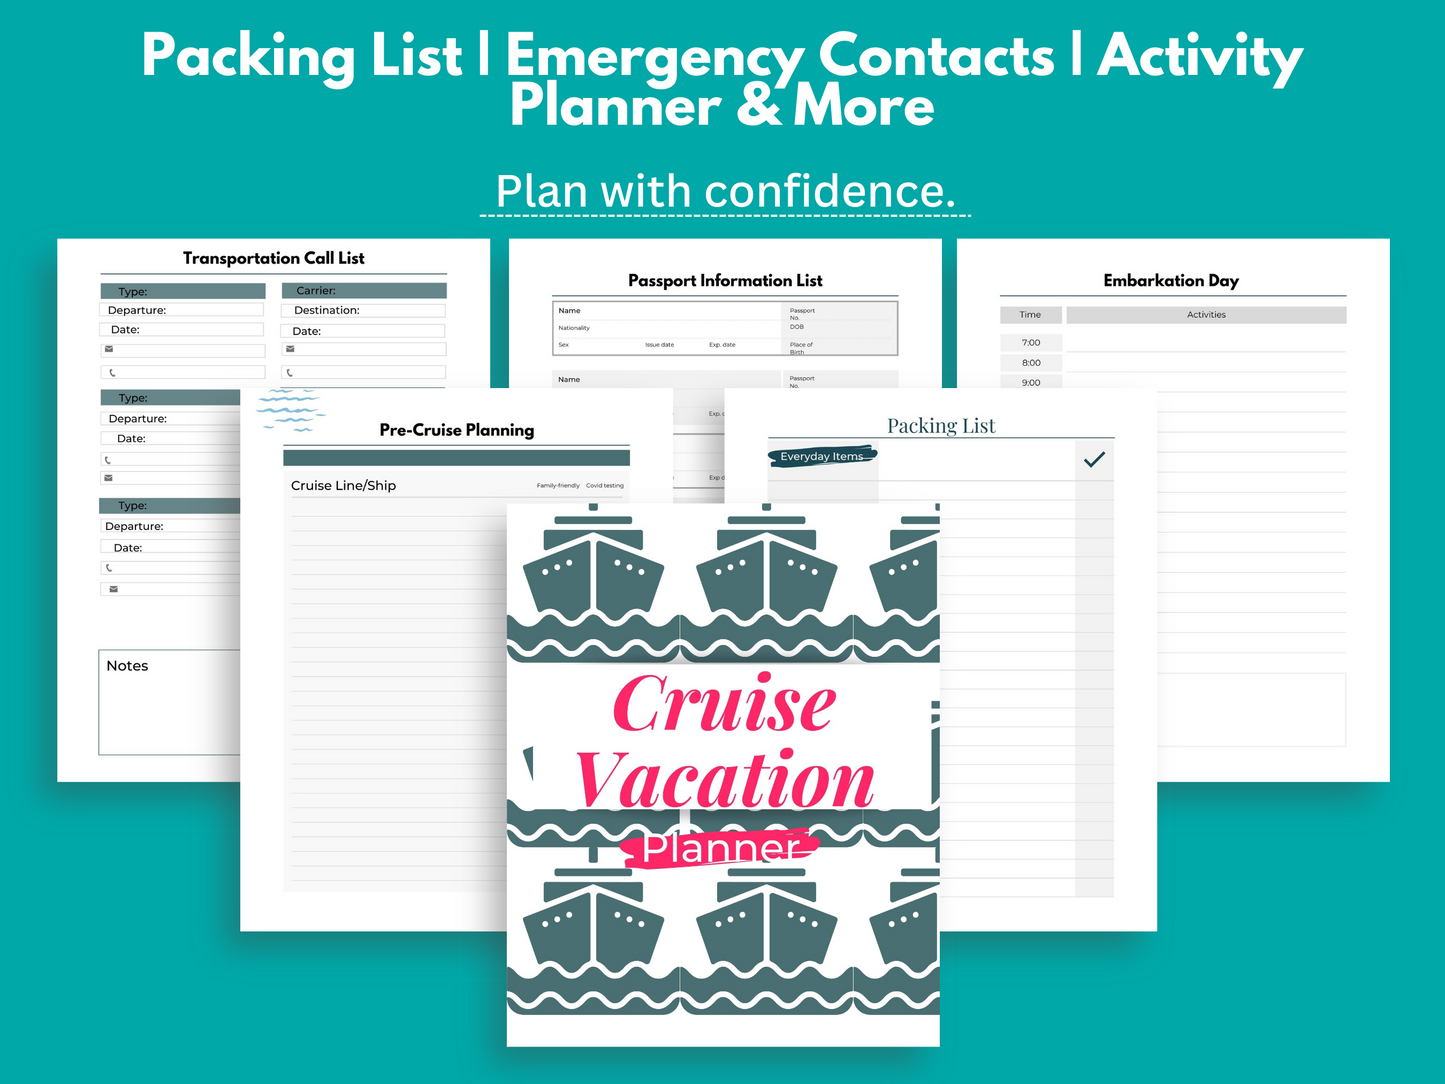 Items inside the cruise planner listed.  Packing list, emergency contacts list, activity planner and more.